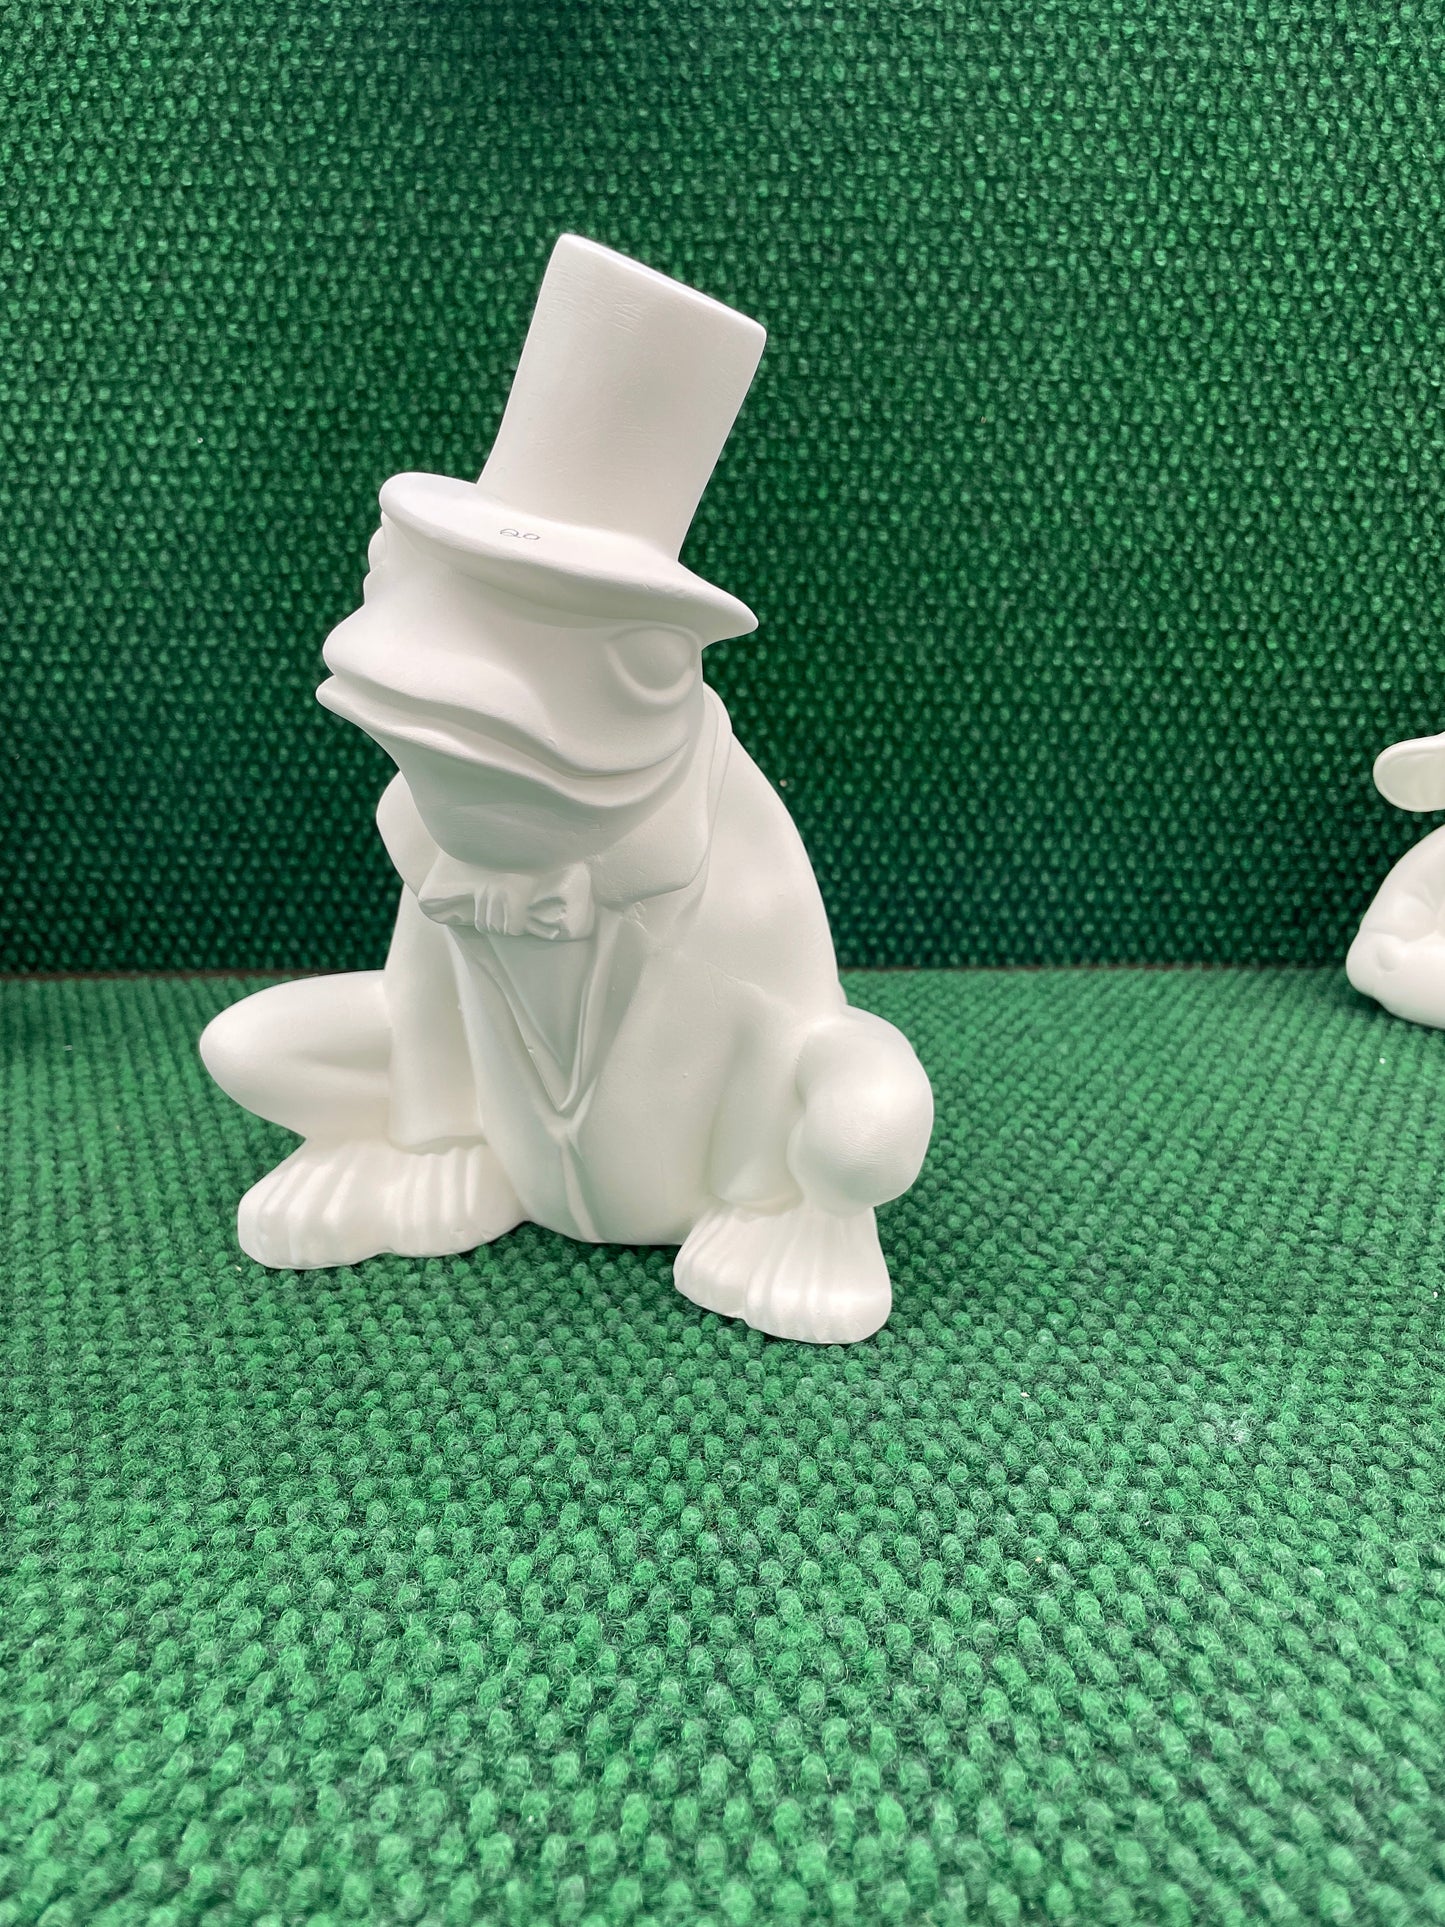 Frog with top hat